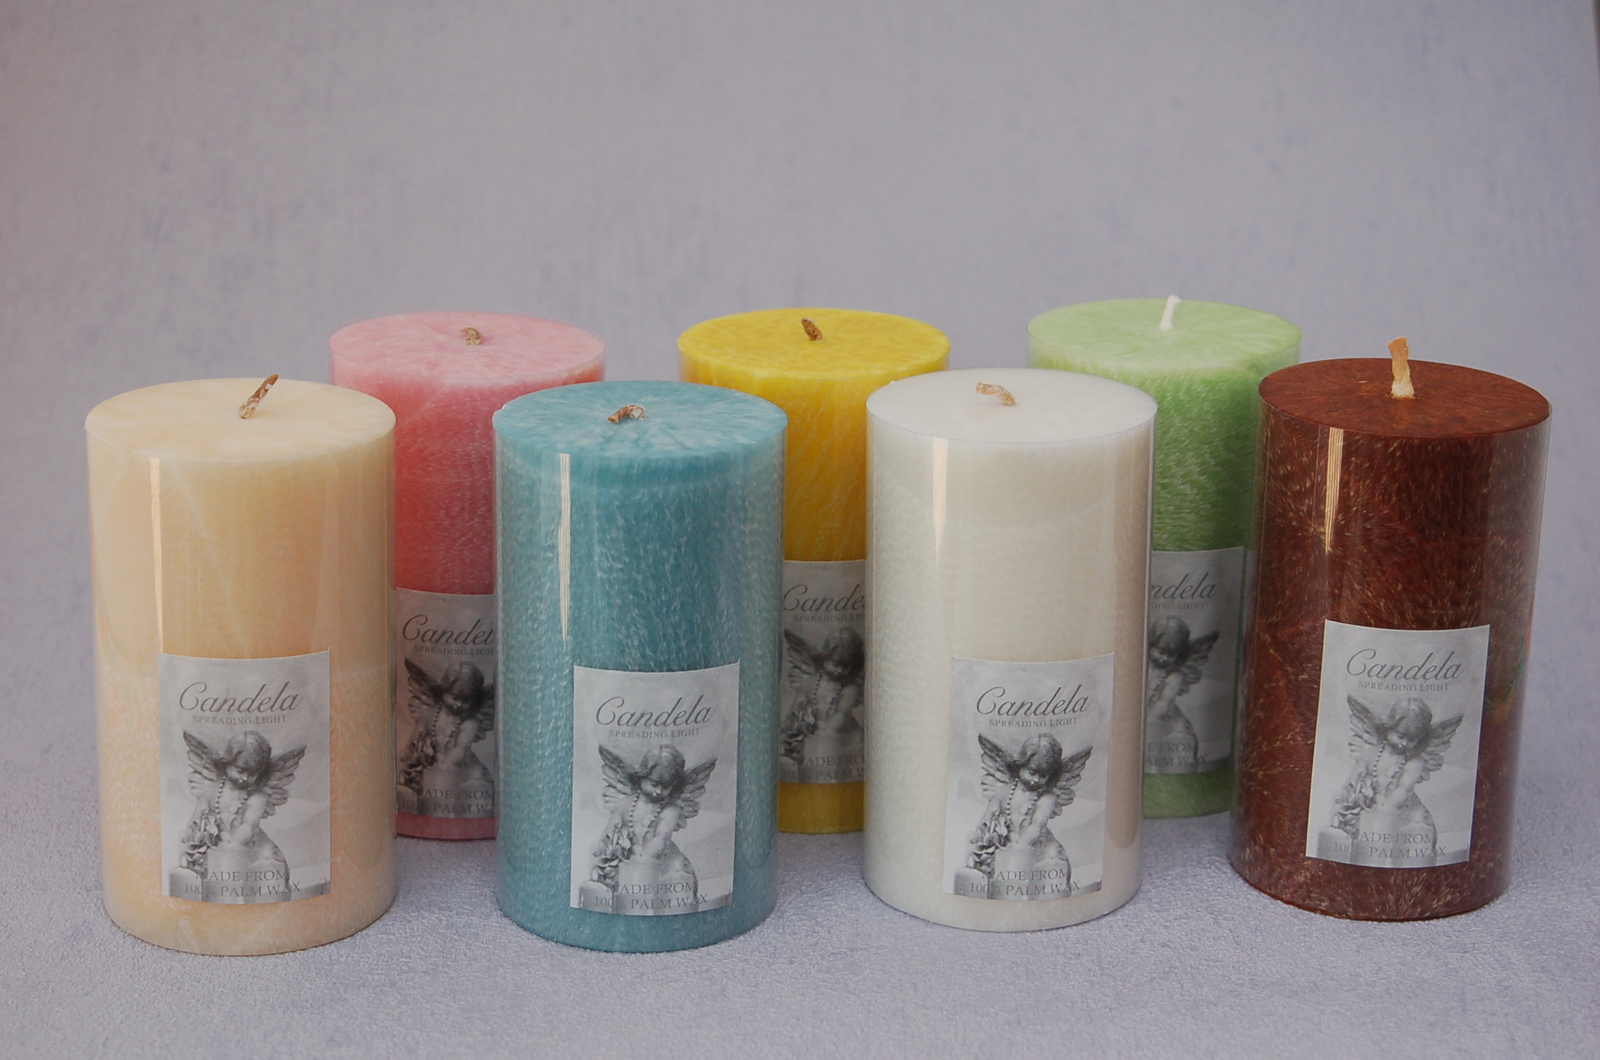 Turquoise Ocean Breeze  Scented Candles 6.4x11cm image 0